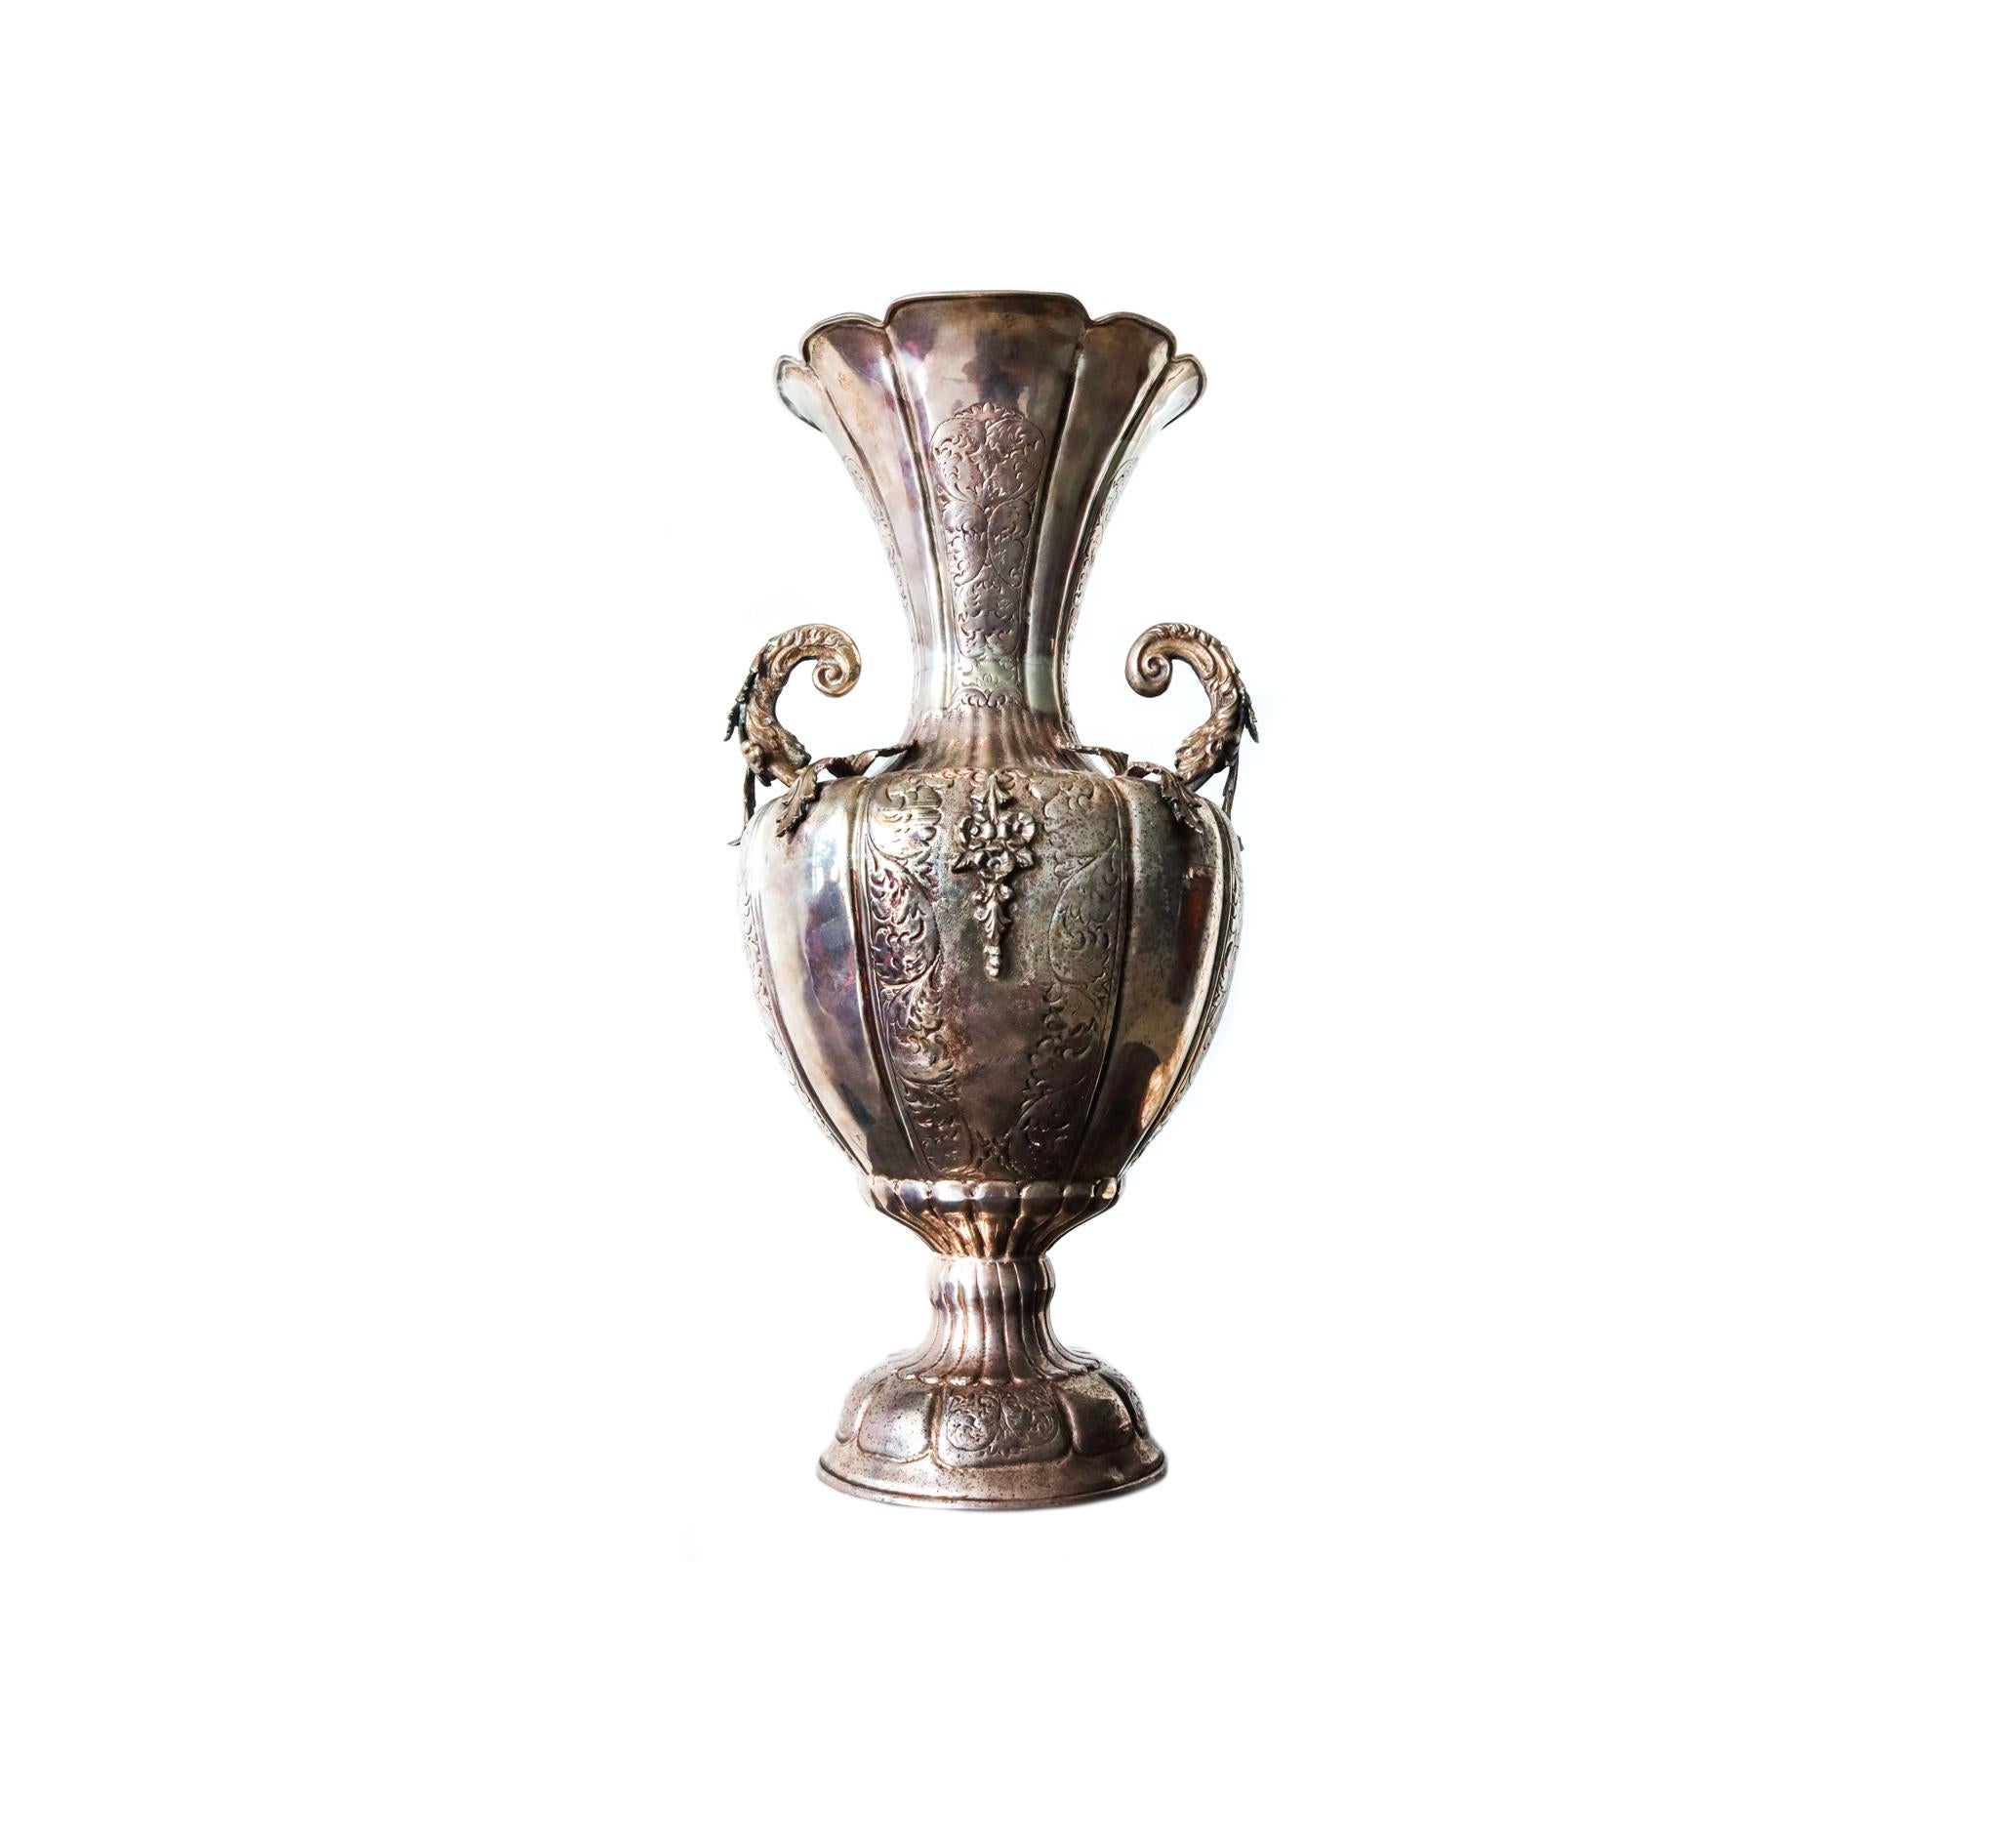 A Spanish Colonial amphora vase with handles.

Gorgeous oversized antique silver piece with baroque and neo-classic patterns. made at the beginning of the 19th century, during the Spanish Colonial period, circa 1820, most probably in the viceroy